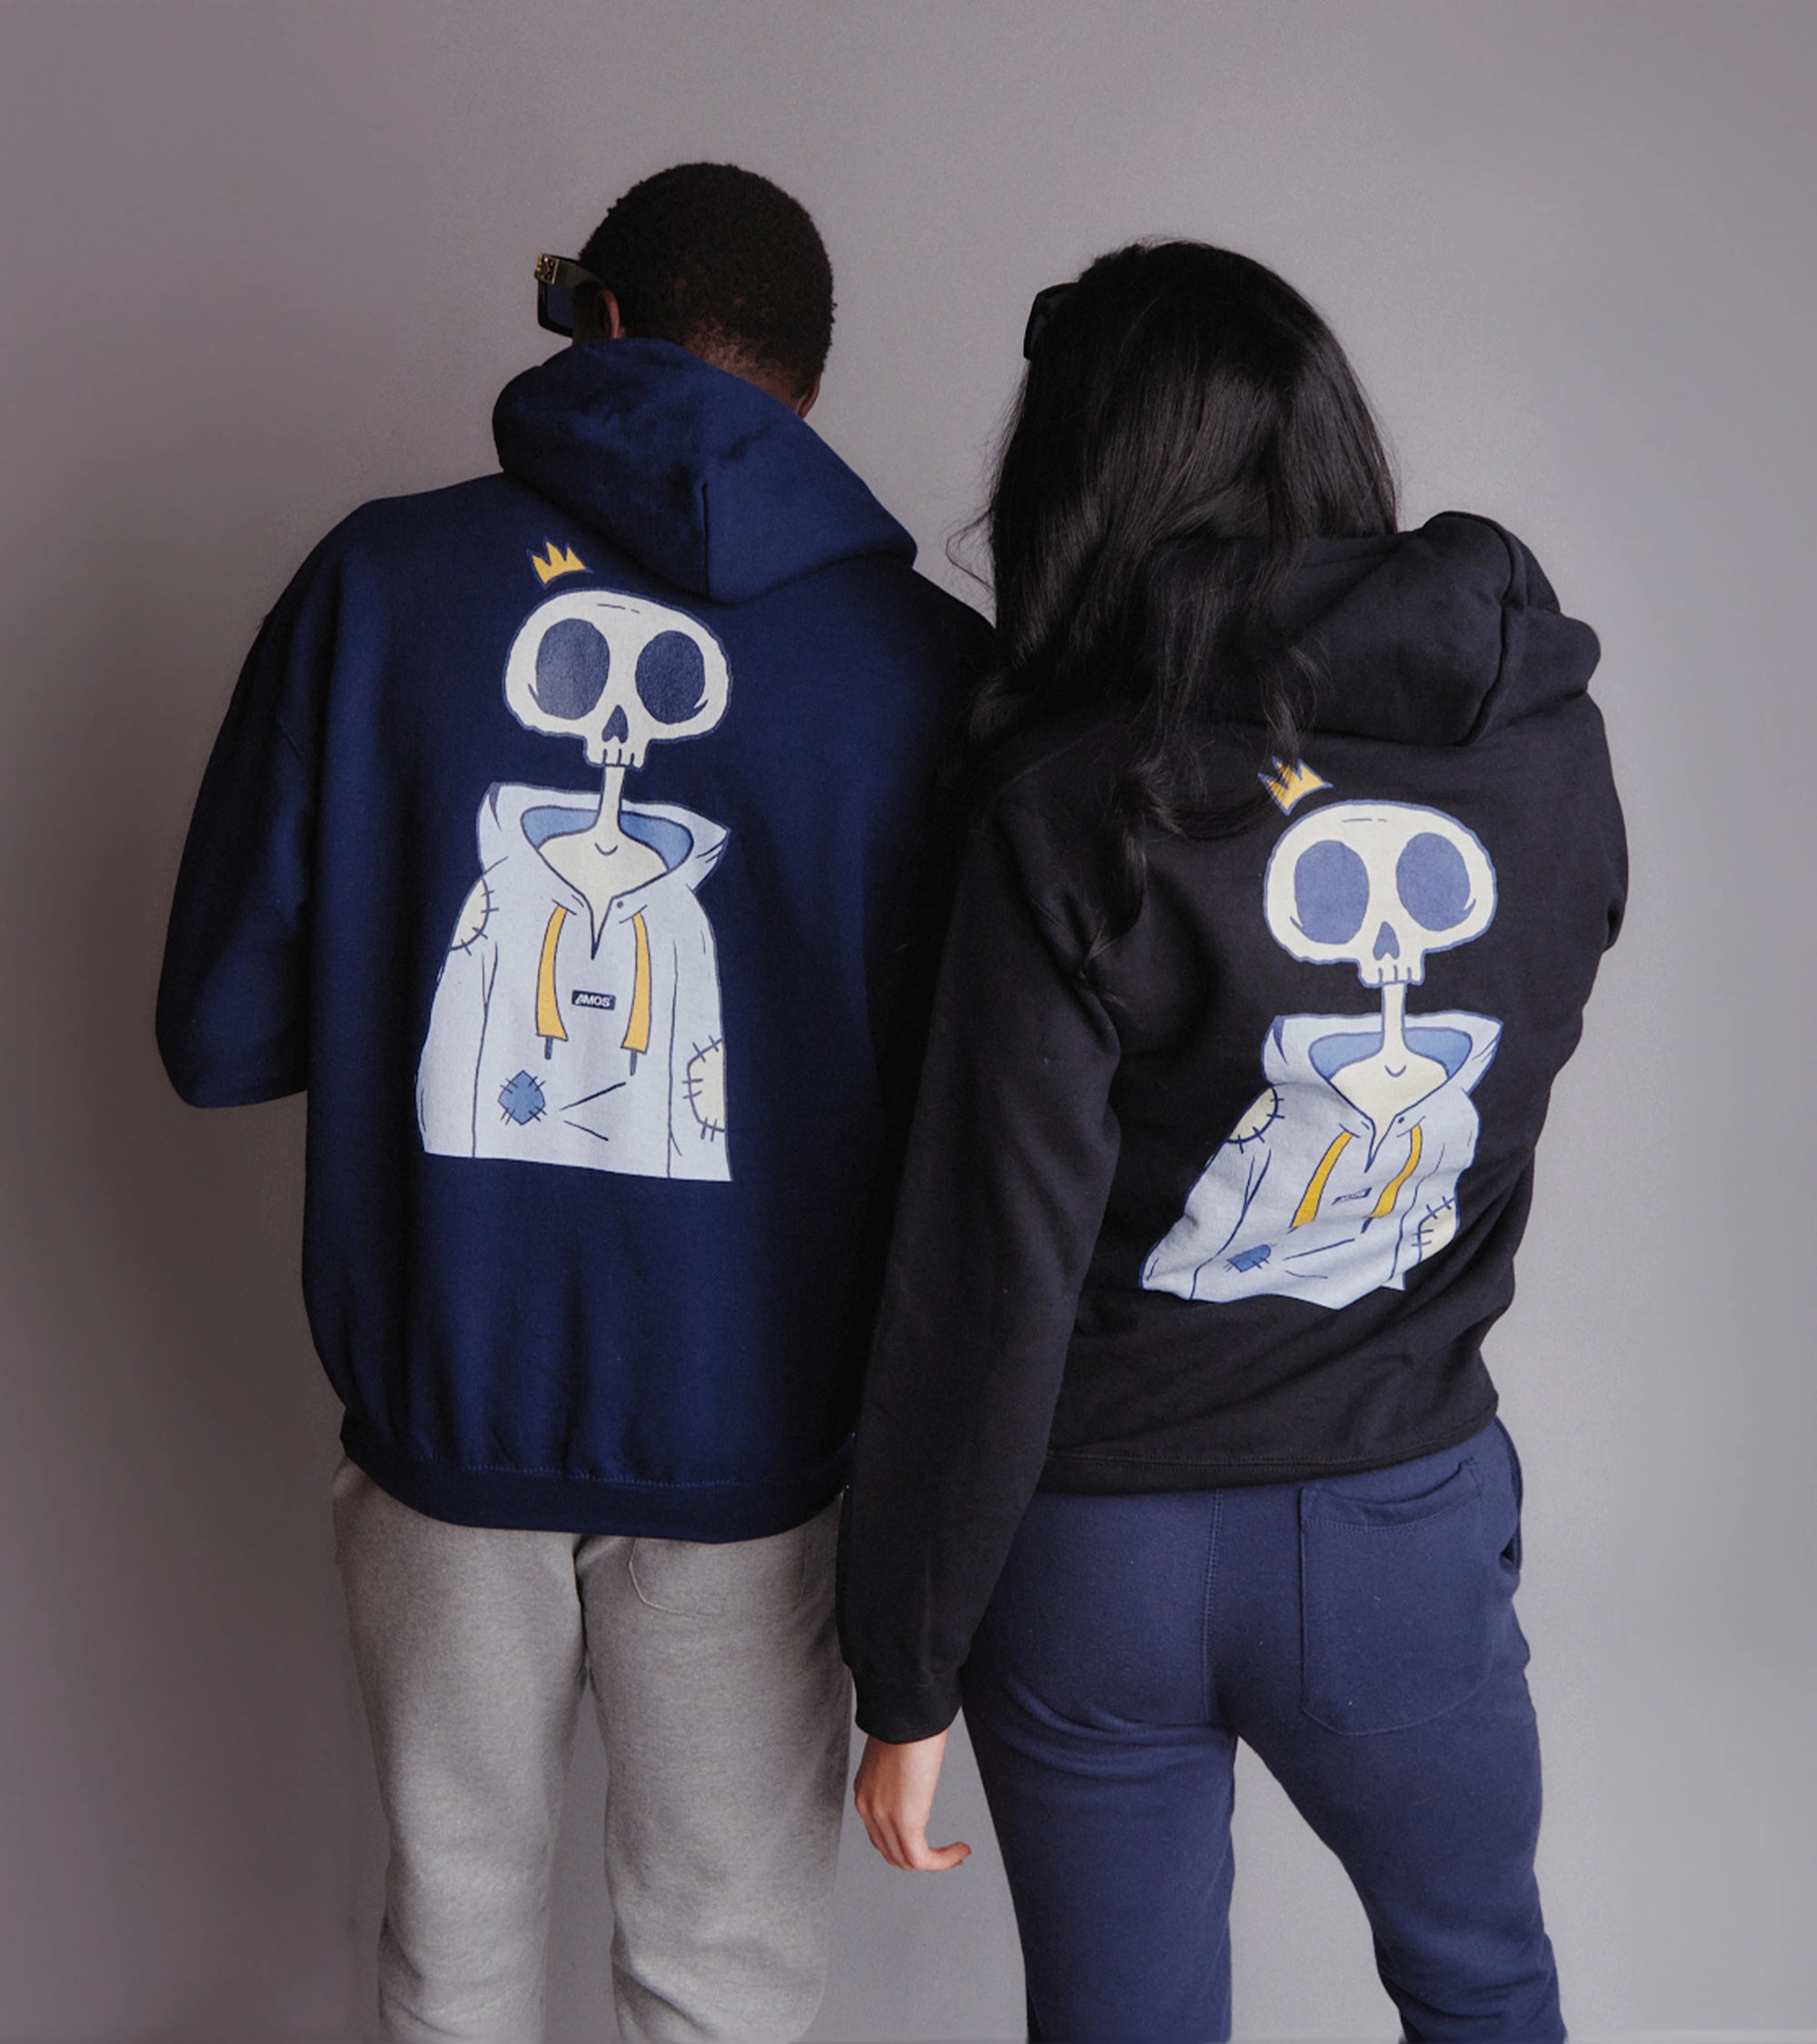 Embroidered Hoodies - Why So Serious Graphic Hoodies